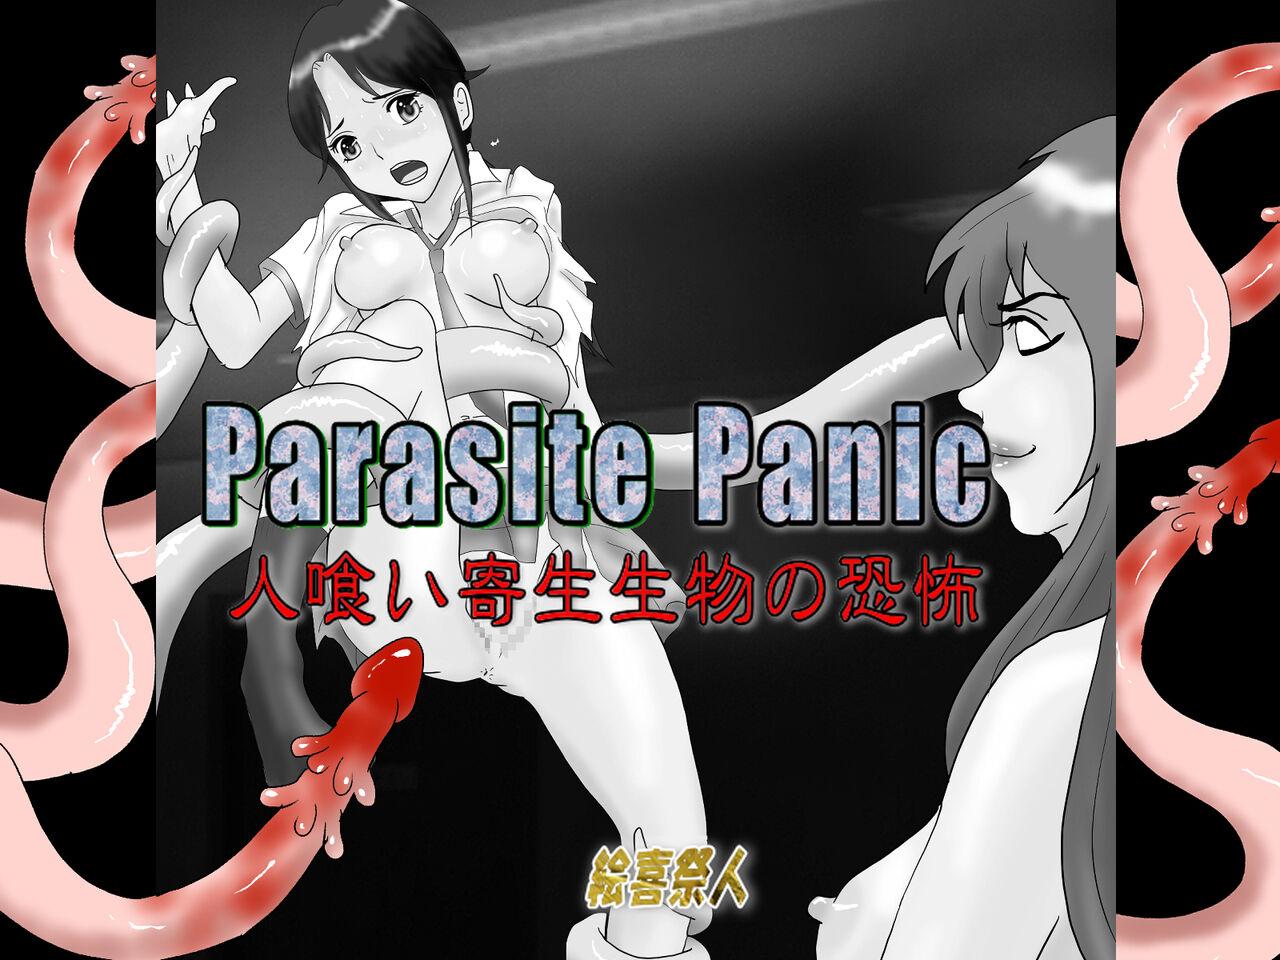 Freaky Parasite Panic Teamskeet - Picture 1